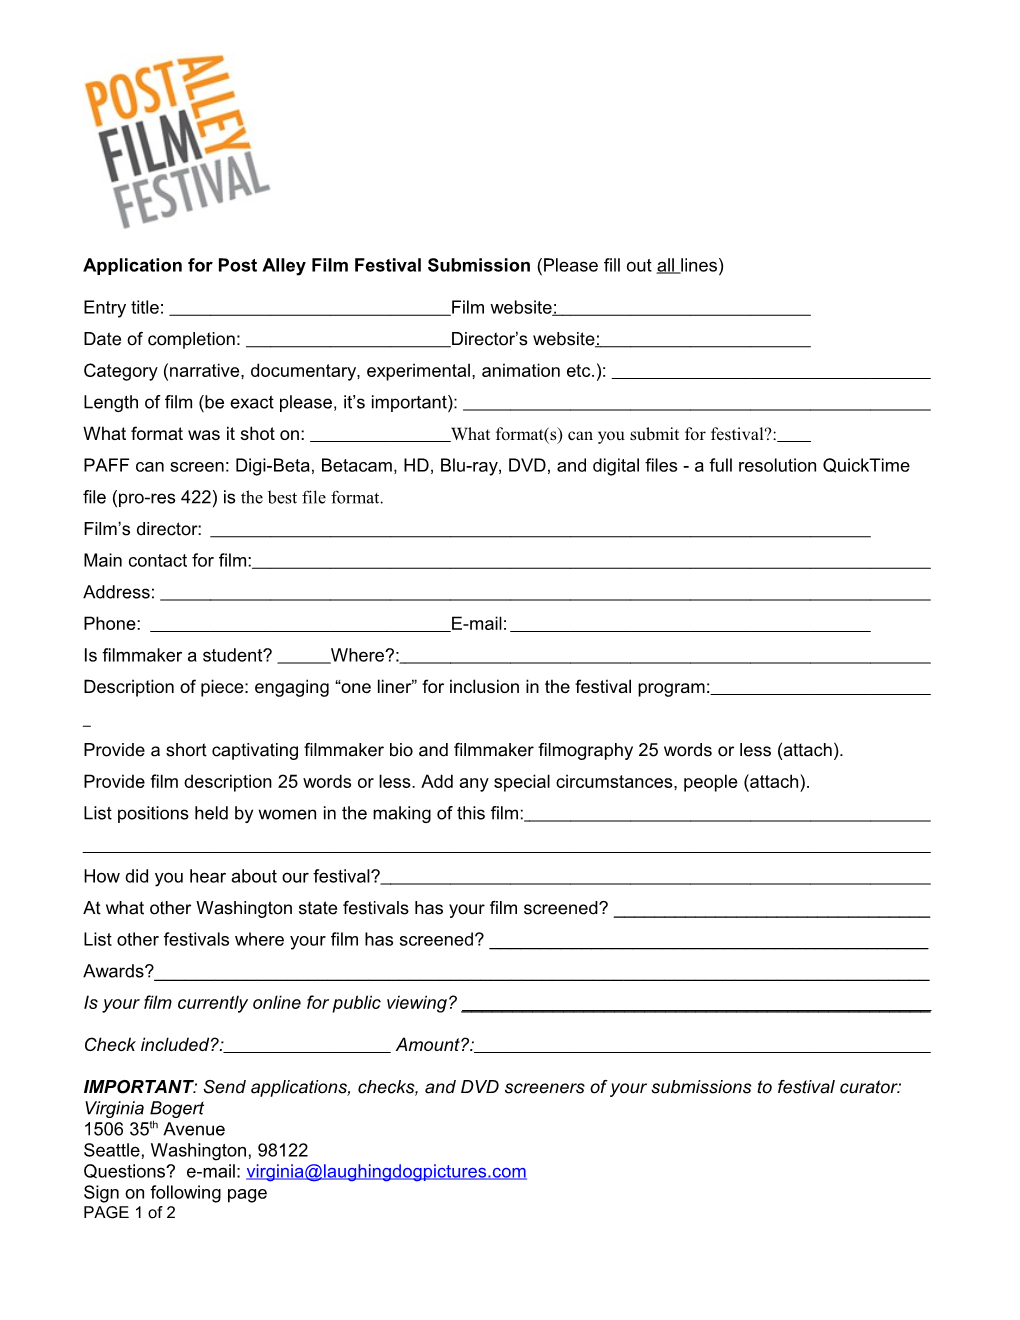 Application for Post Alley Film Festival Submission (Please Fill out All Lines)